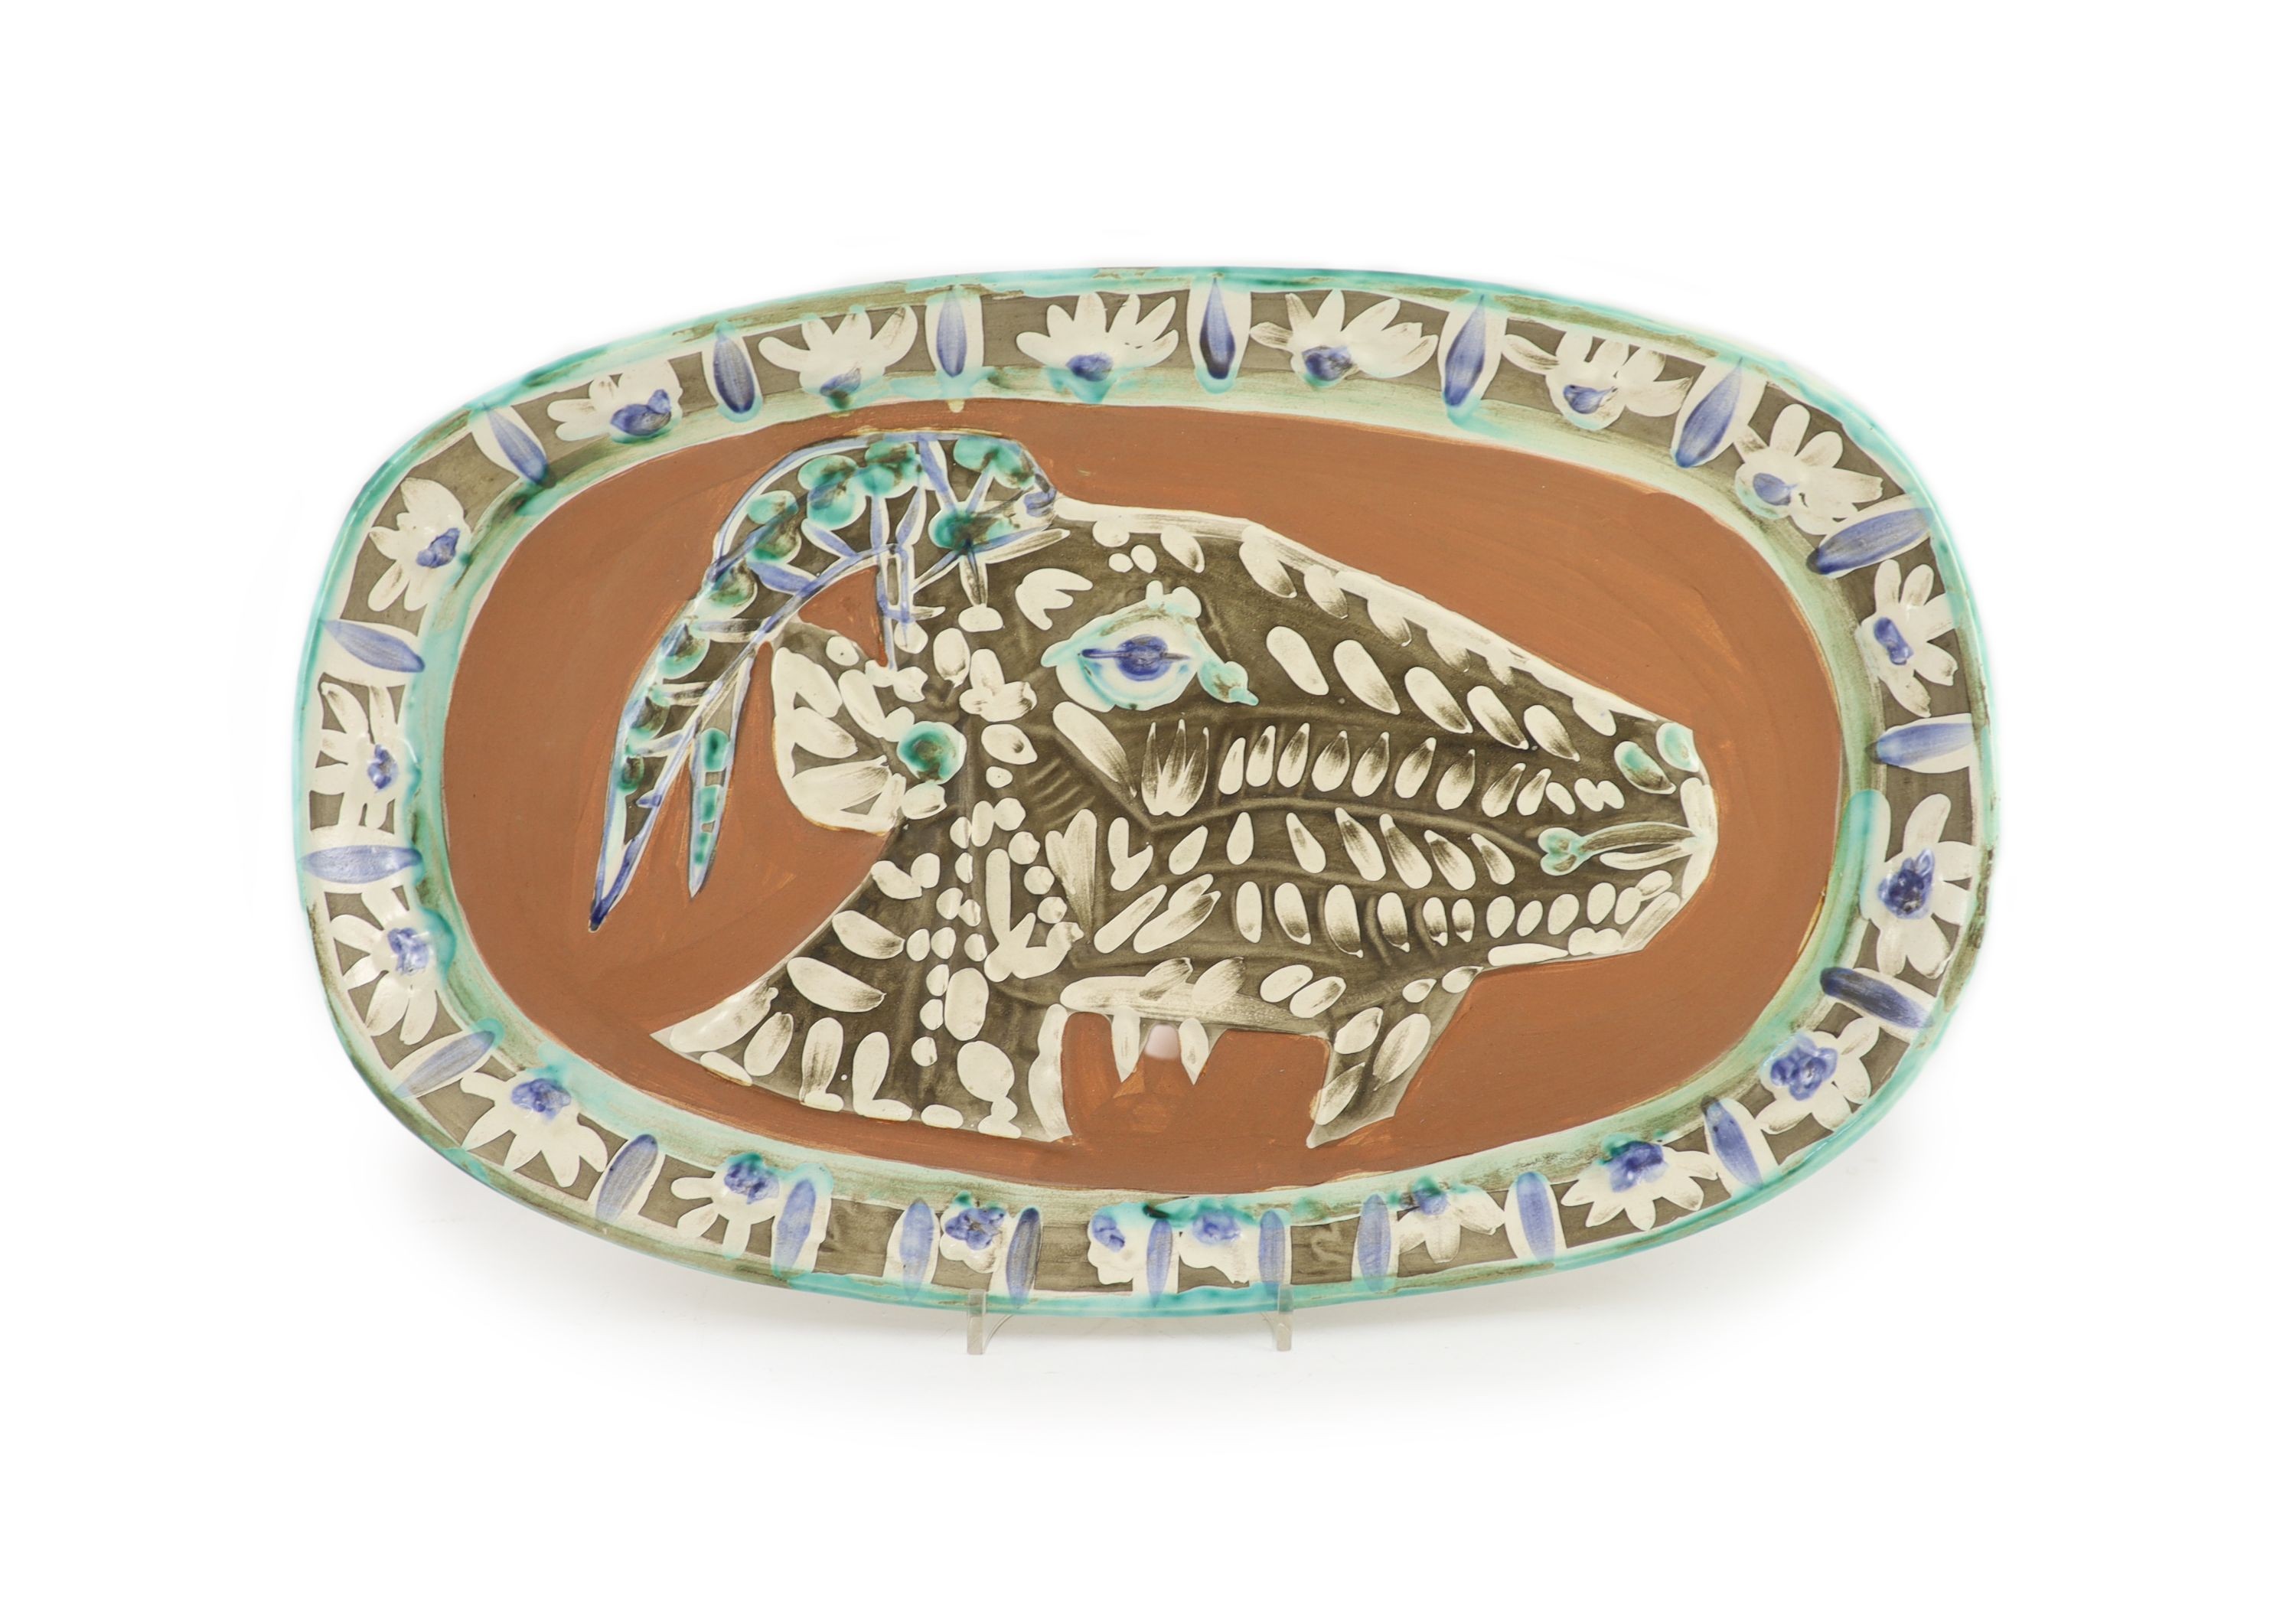 § Pablo Picasso (1881-1973) for Madoura pottery, an oblong dish with Goat's Head in Profile (Tete